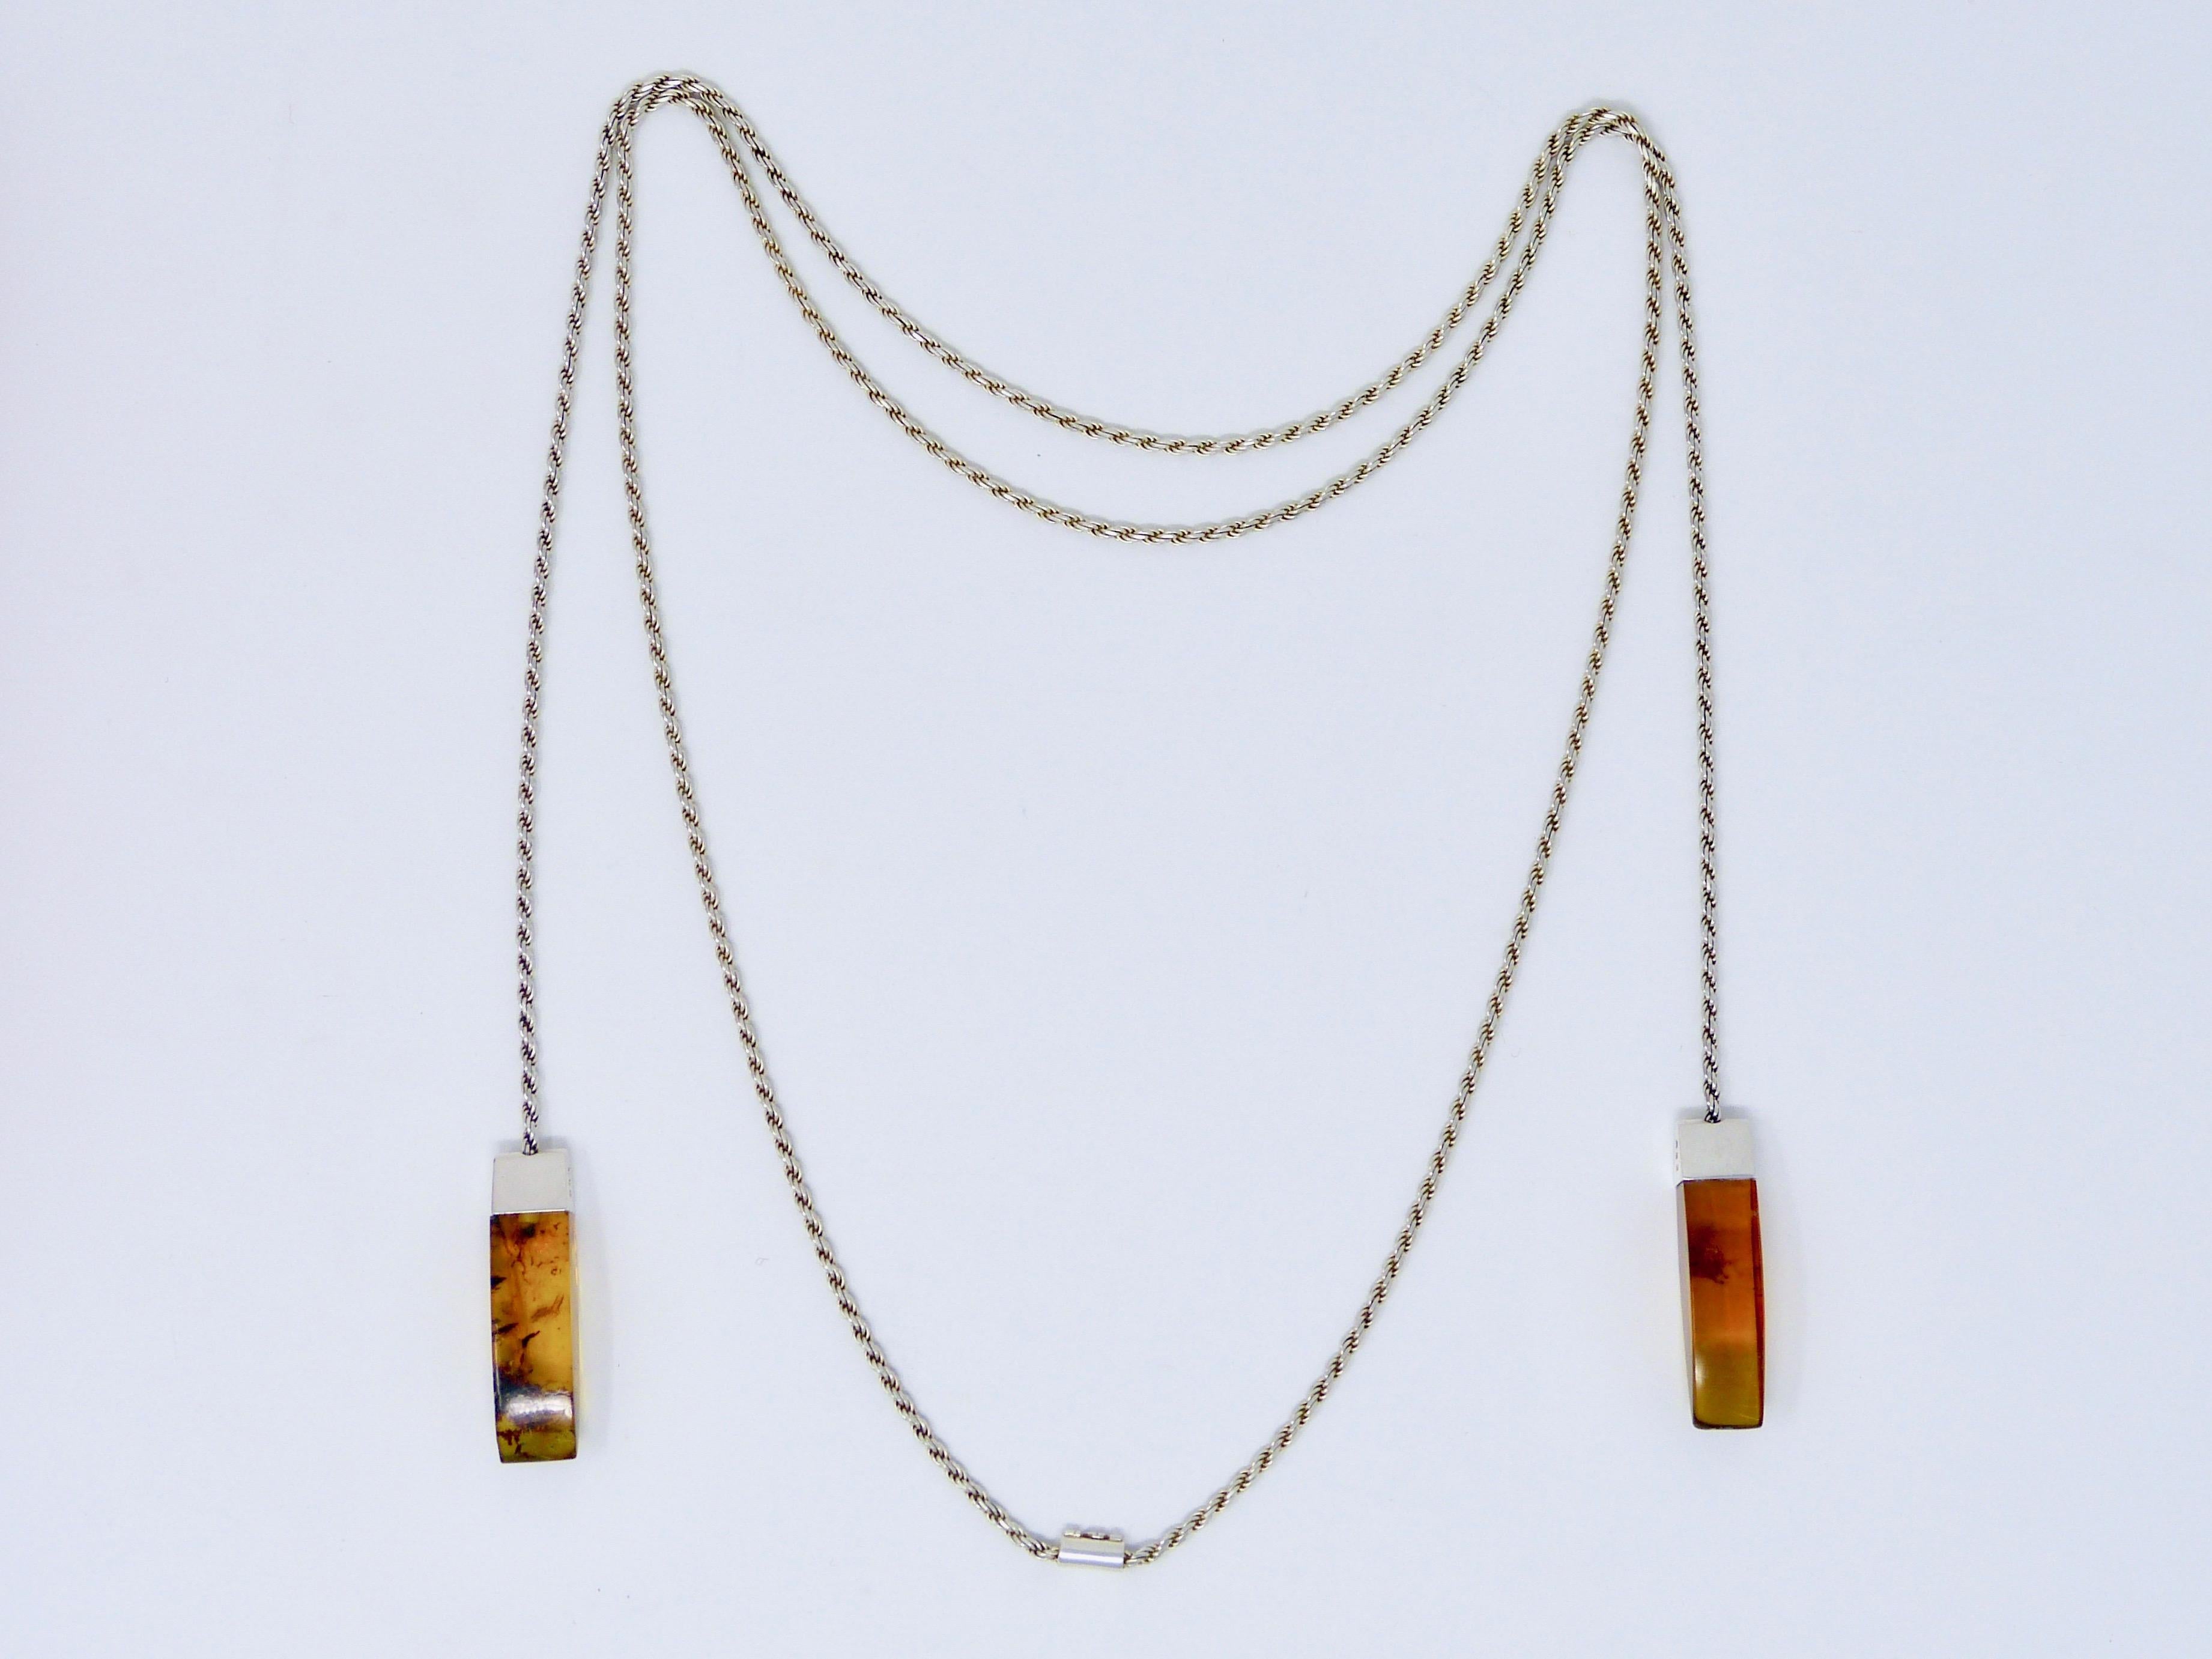 Sterling silver and amber necklace 
Made by Tane
The necklace measures 55